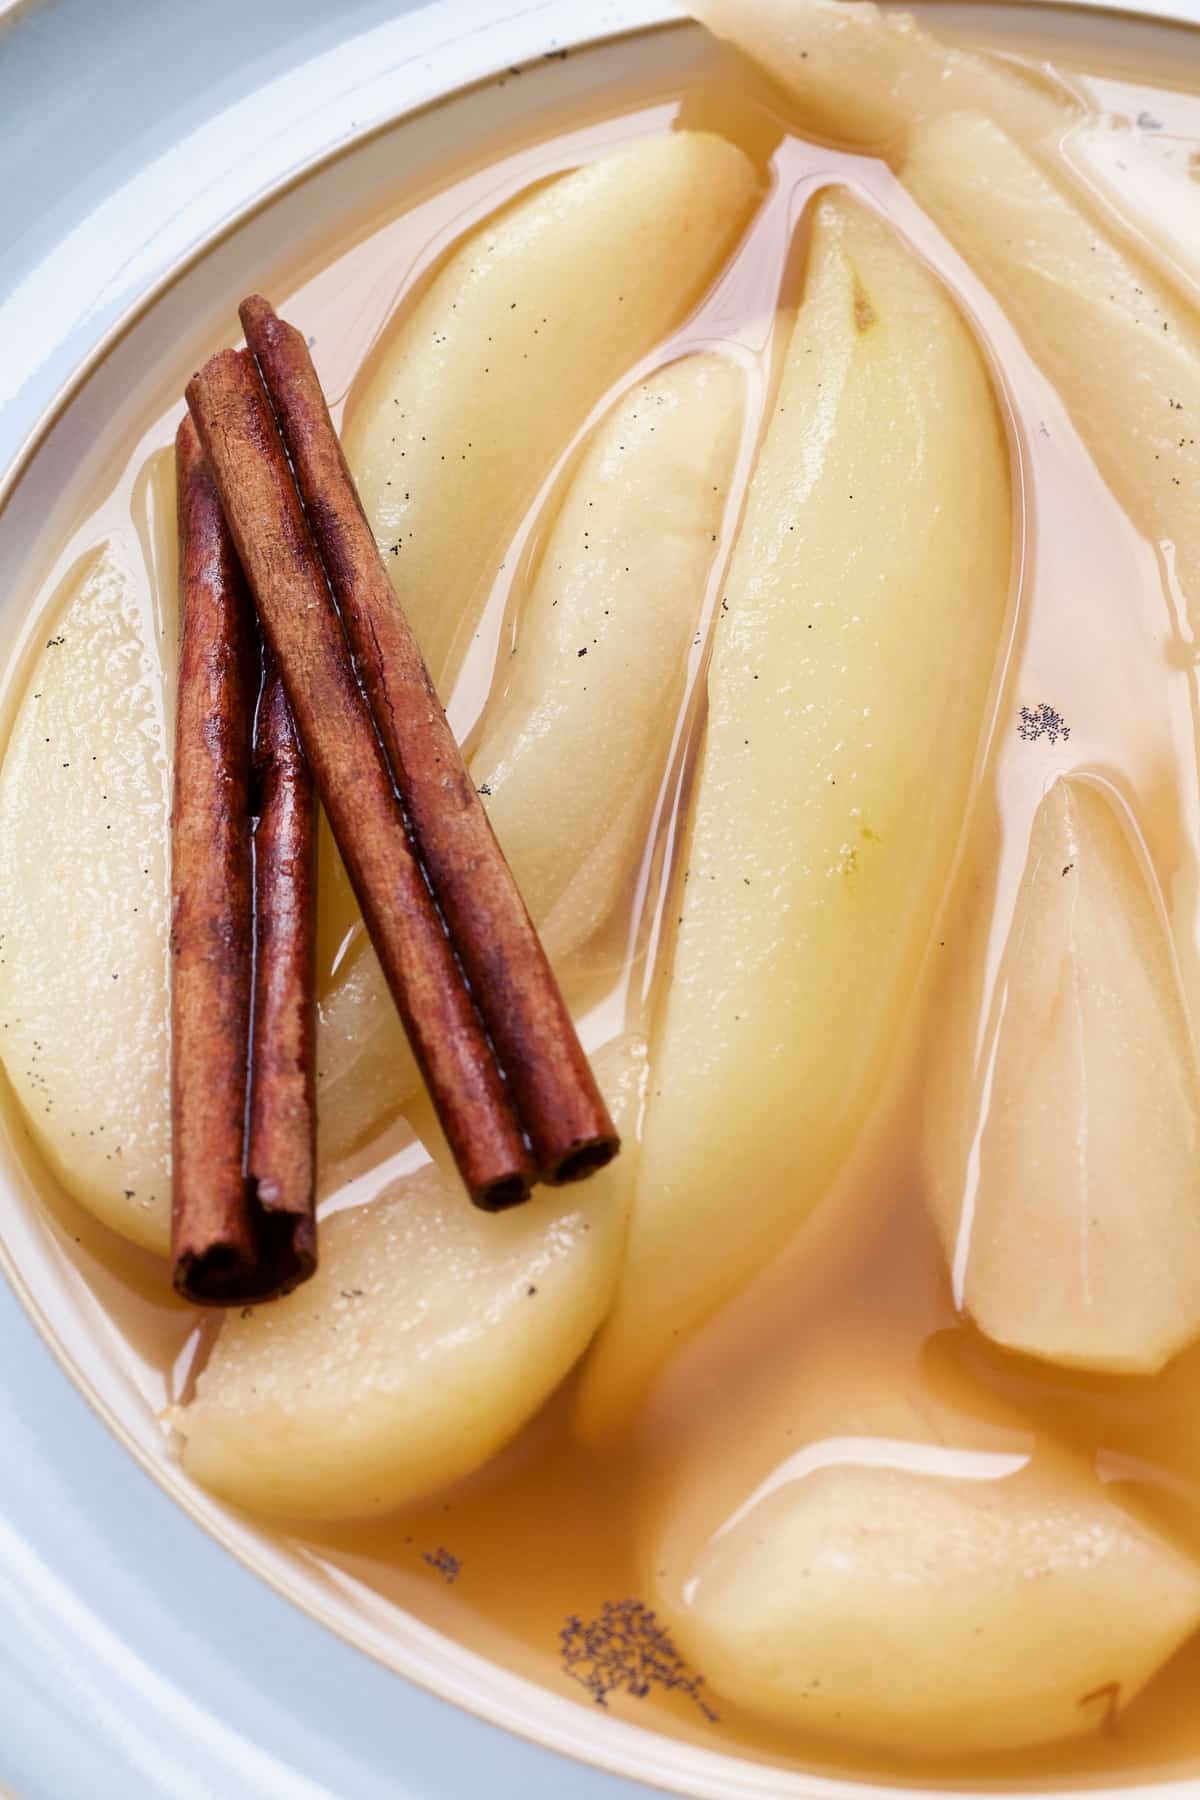 Stewed pears in a bowl with two cinnamon sticks.